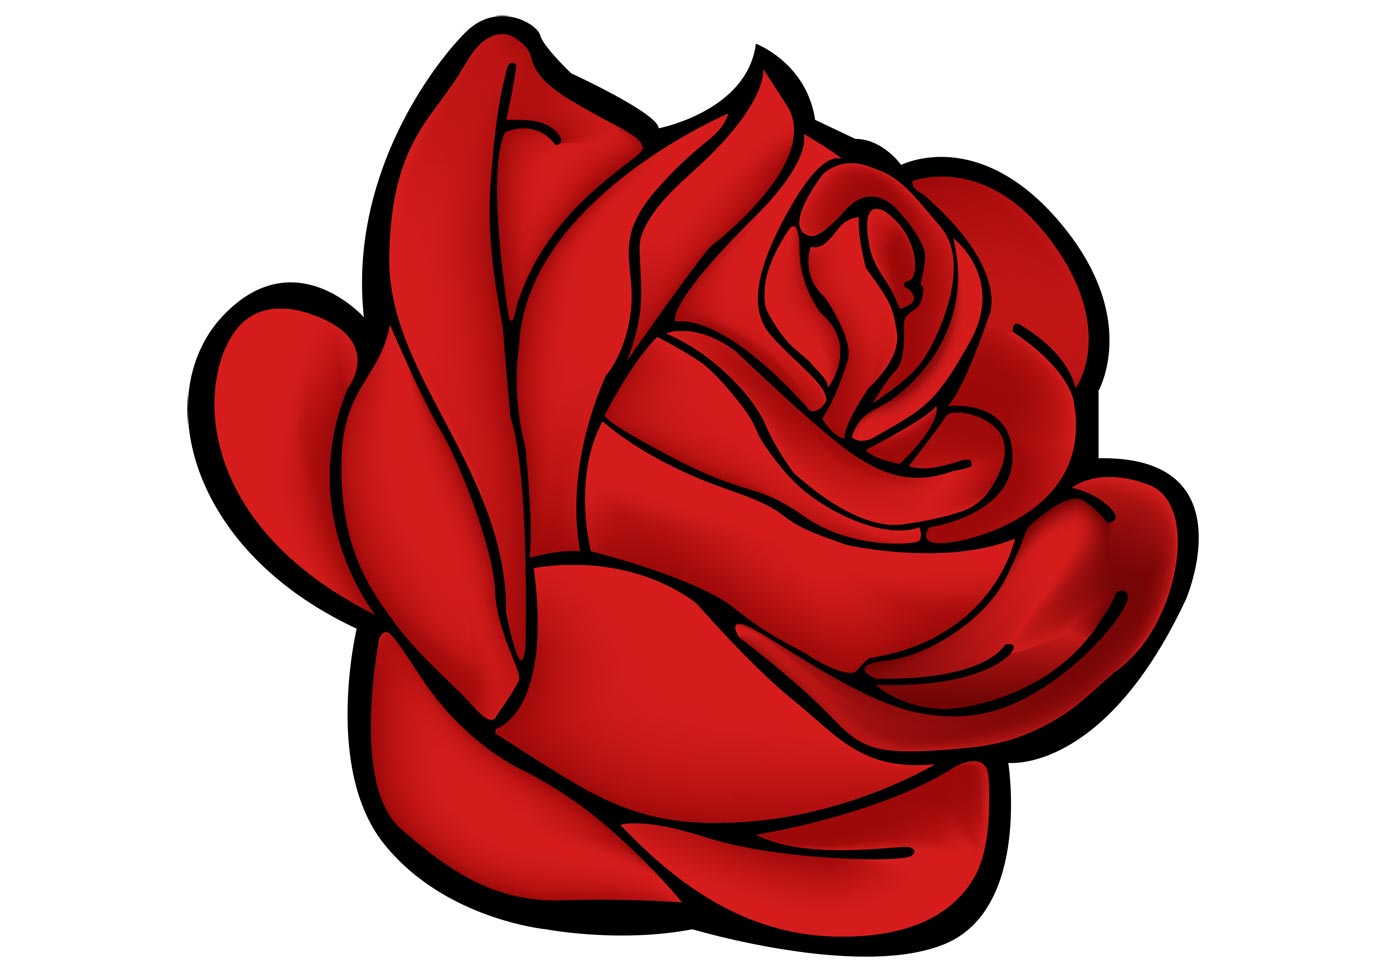 Red Rose Free Vector Art - (10105 Free Downloads)